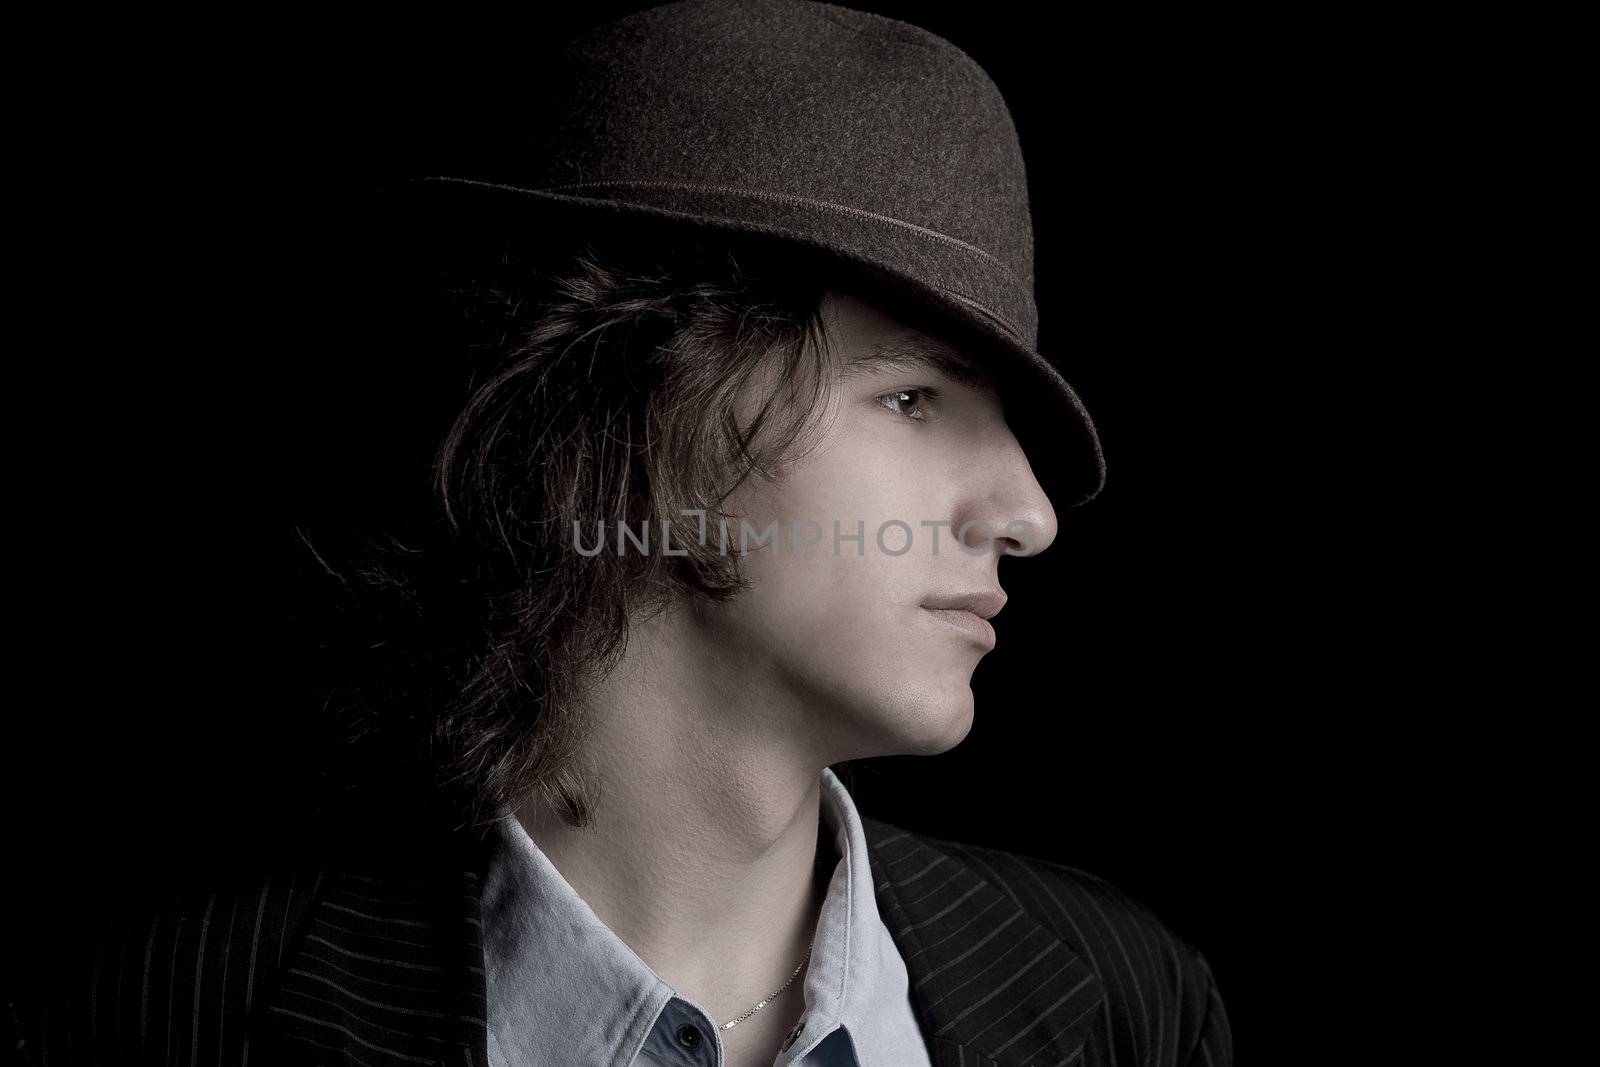 Profile of a male teenager with a hat with desaturated effect